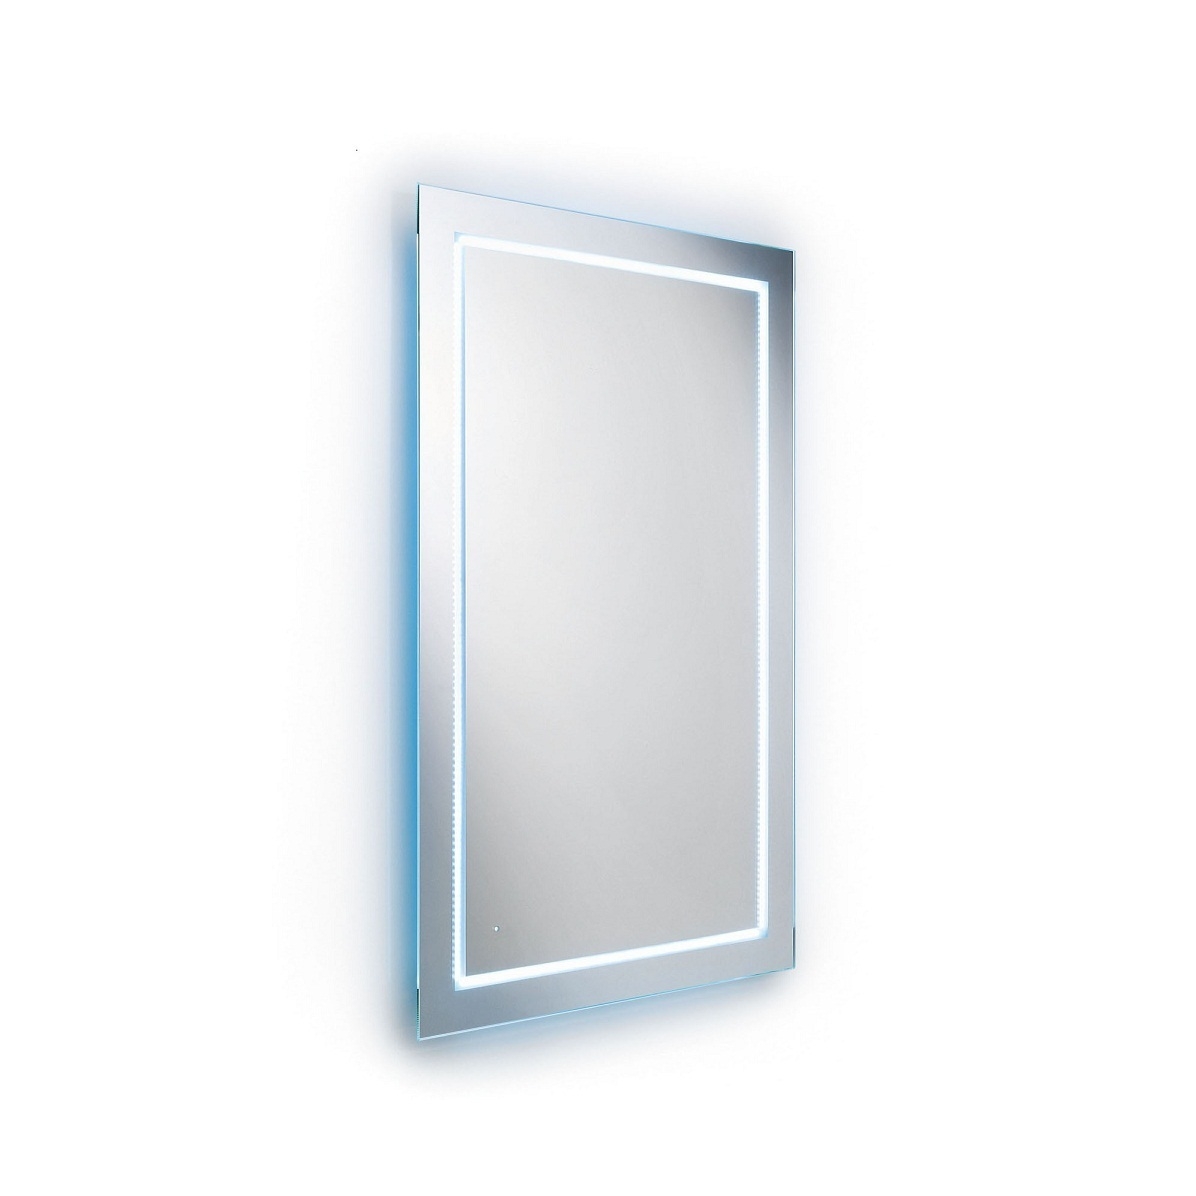 Speci 5685 mirror with LED light